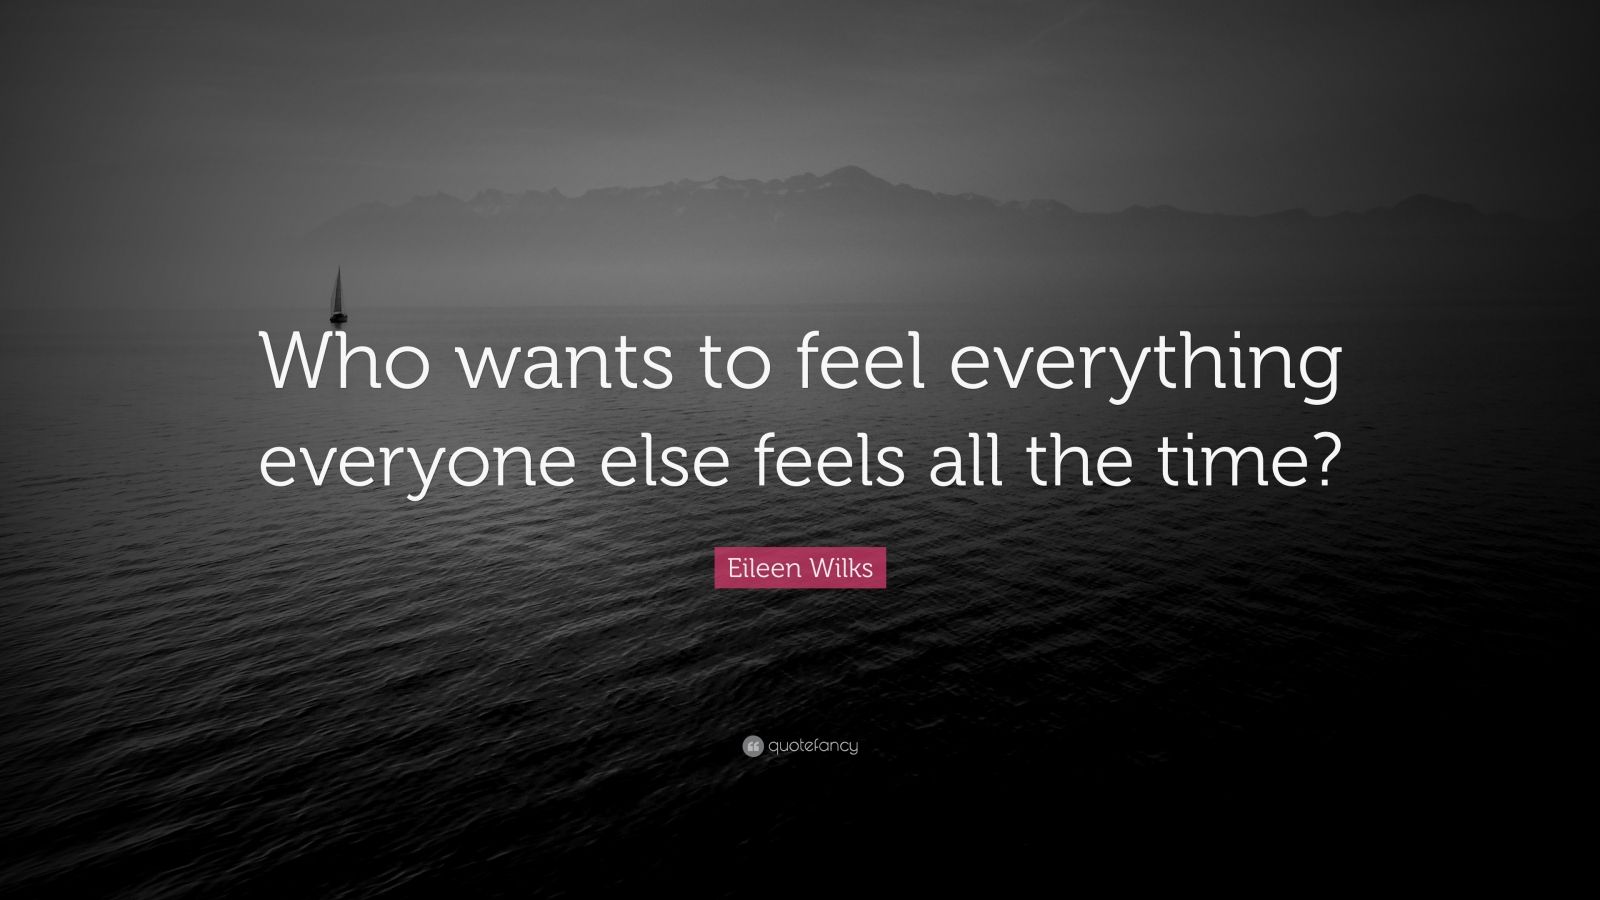 Eileen Wilks Quote “who Wants To Feel Everything Everyone Else Feels All The Time”